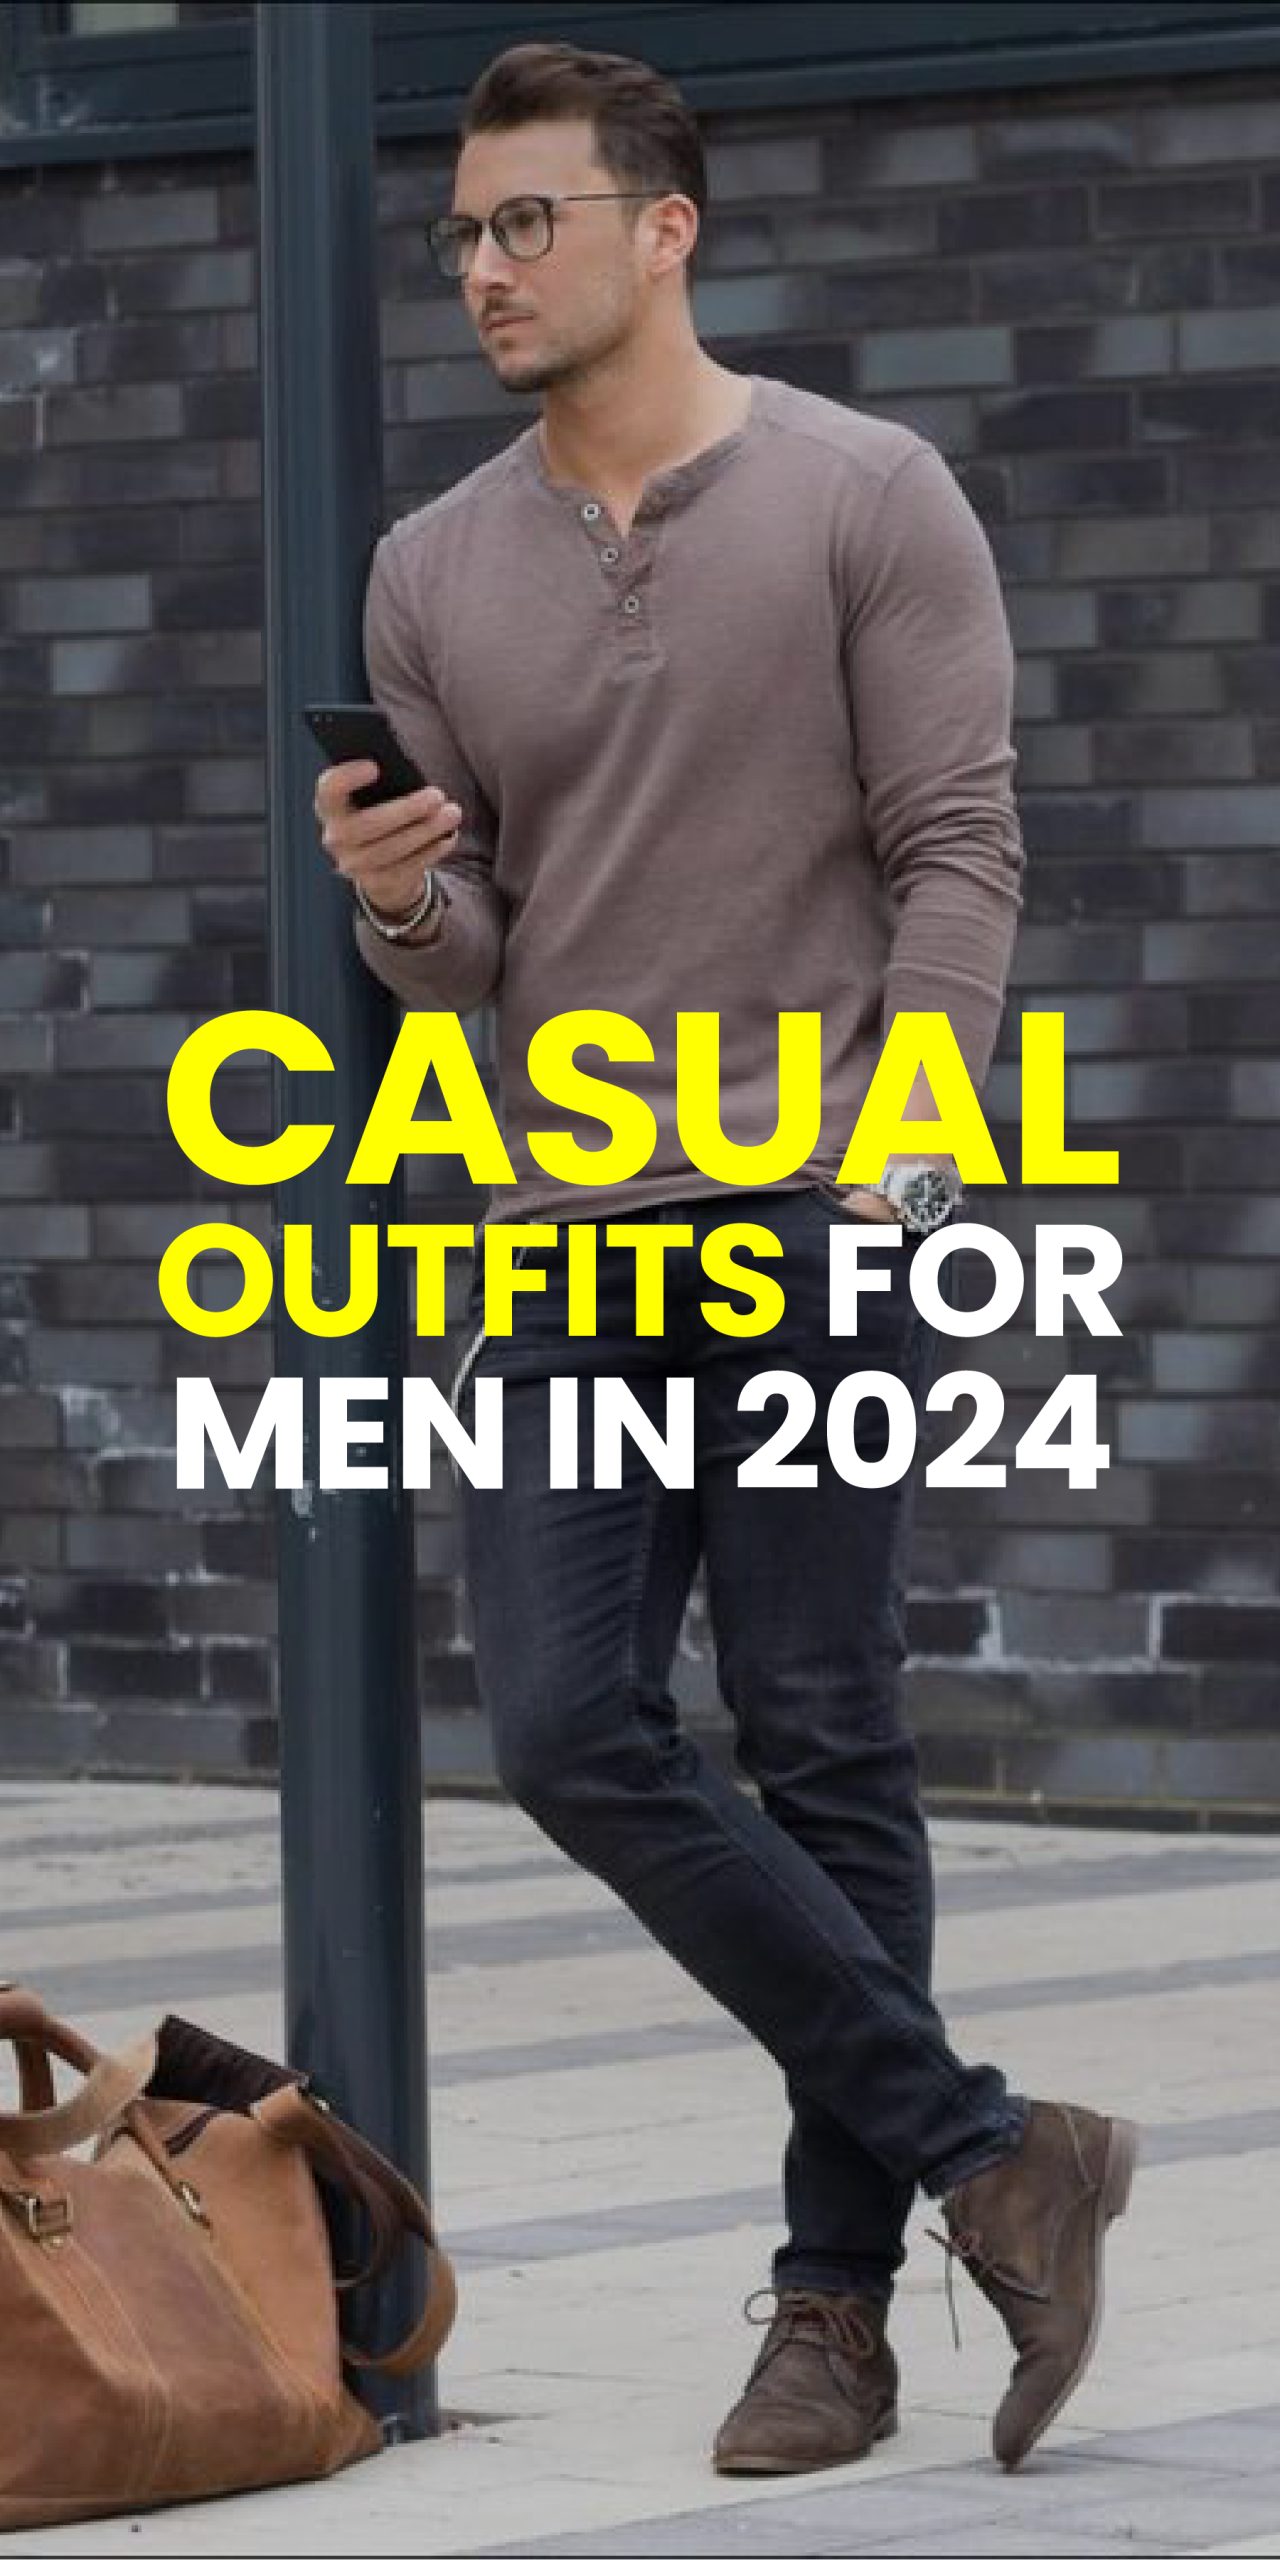 TRENDING CASUAL OUTFIT TRENDS FOR MEN